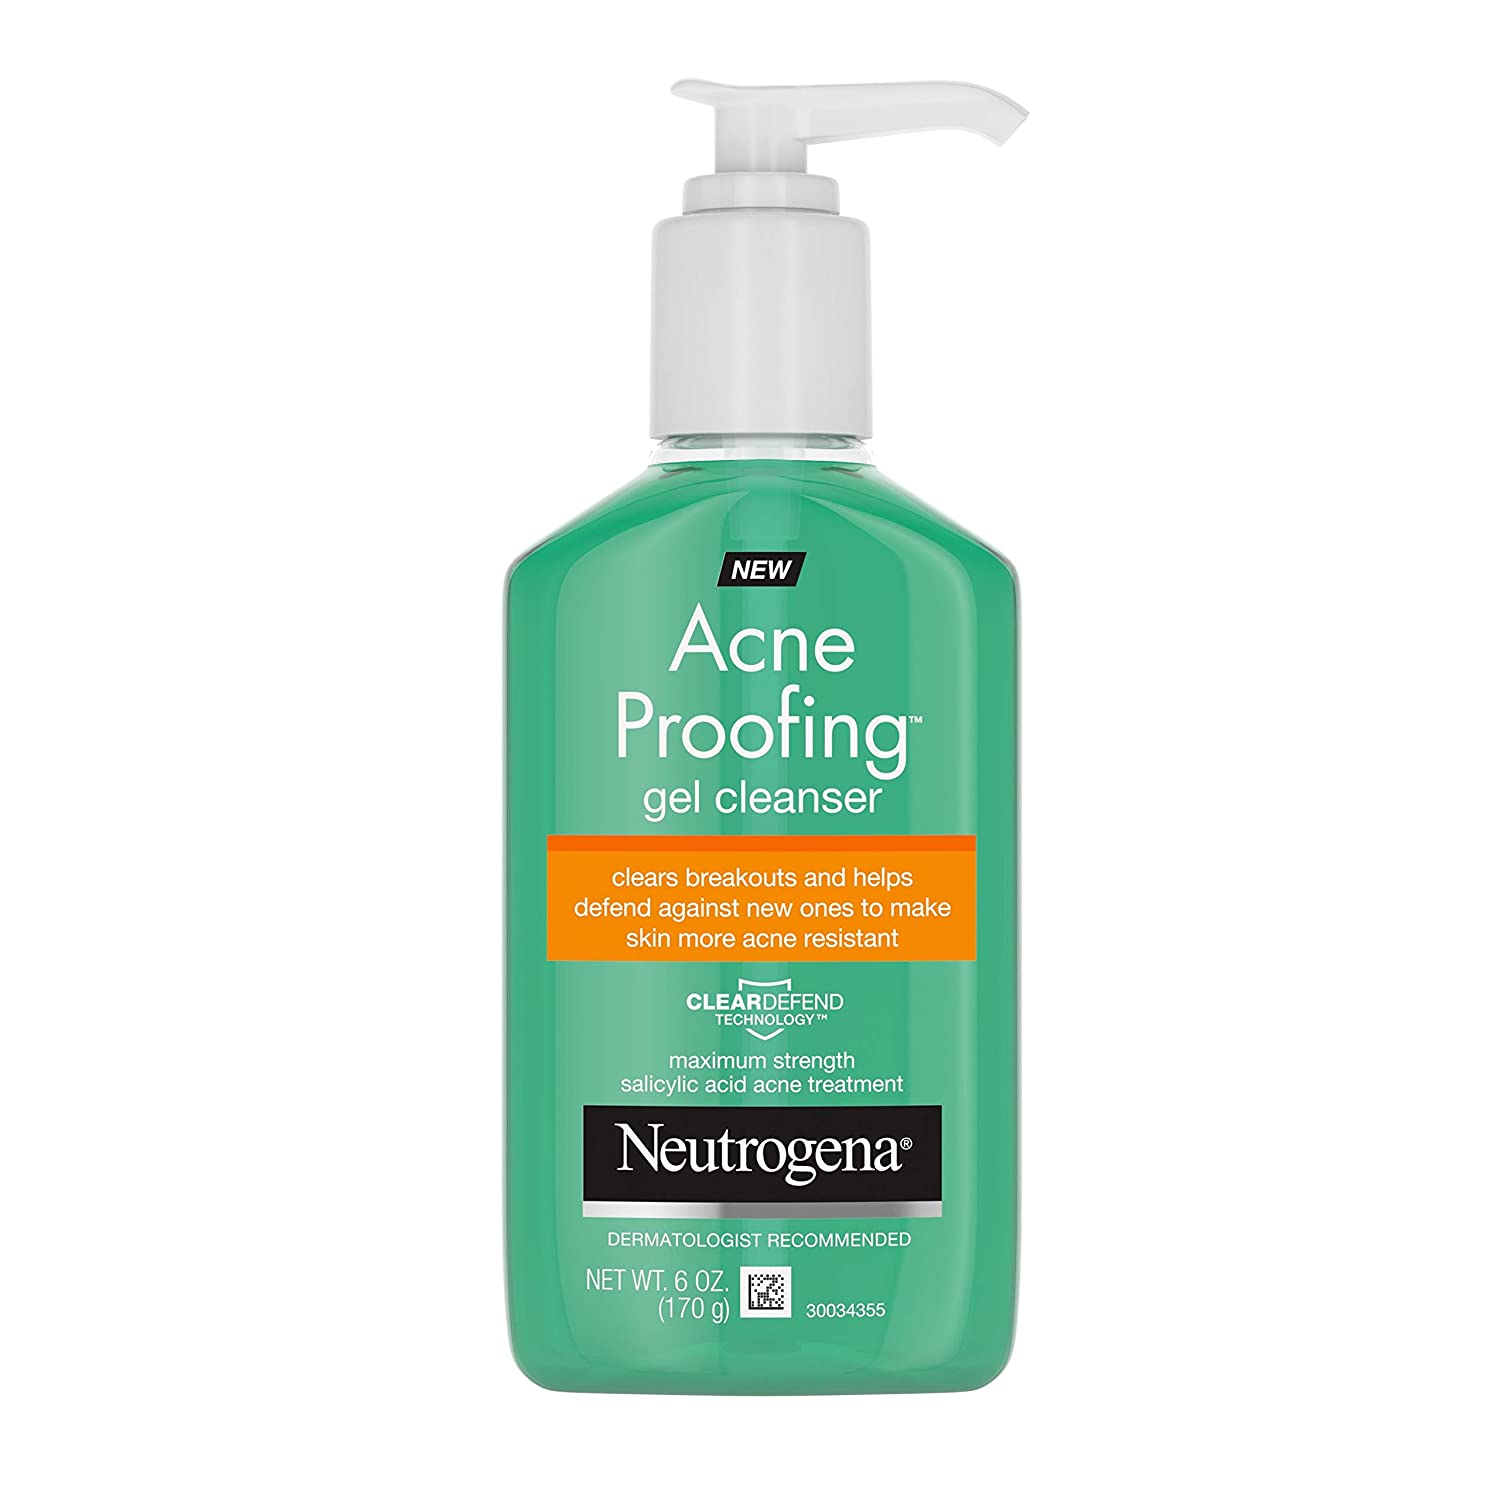 Neutrogena Acne Proofing Daily Facial Gel Cleanser